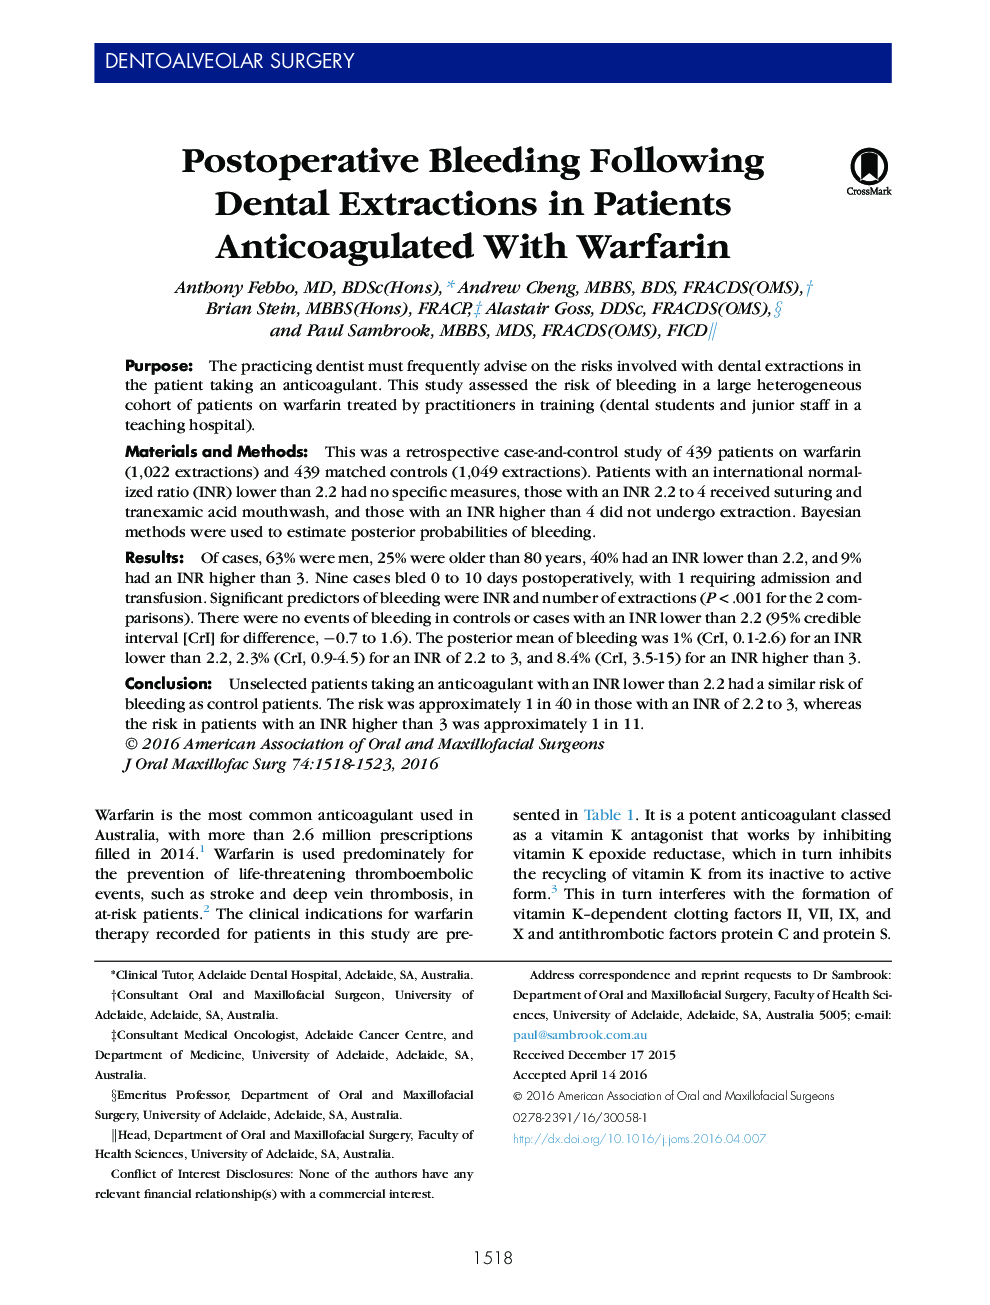 Postoperative Bleeding Following Dental Extractions in Patients Anticoagulated With Warfarin